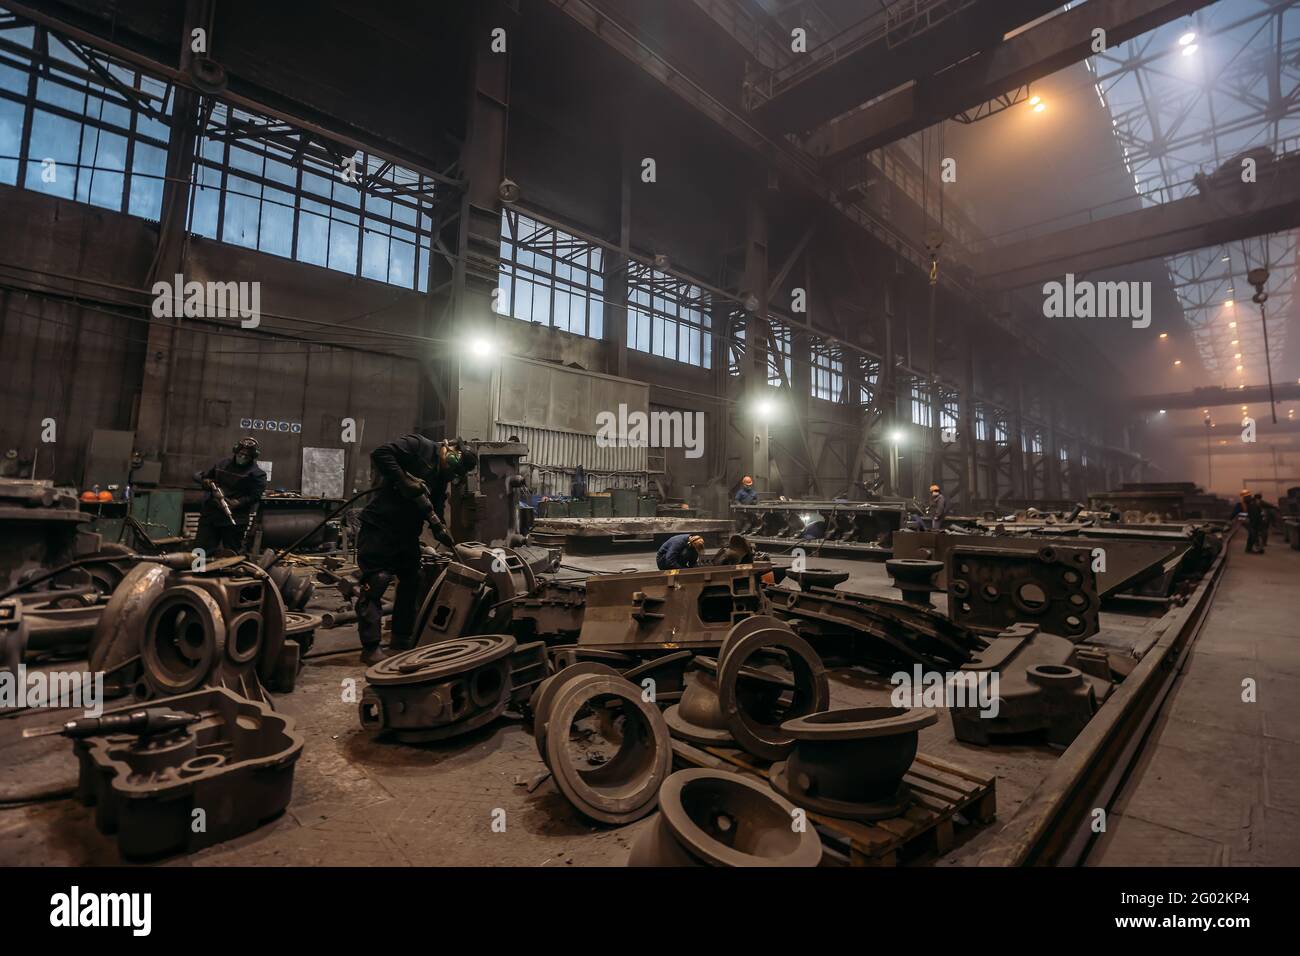 Large workshop interior for metalworking of finished cast metal products at metallurgical plant of heavy industry. Stock Photo